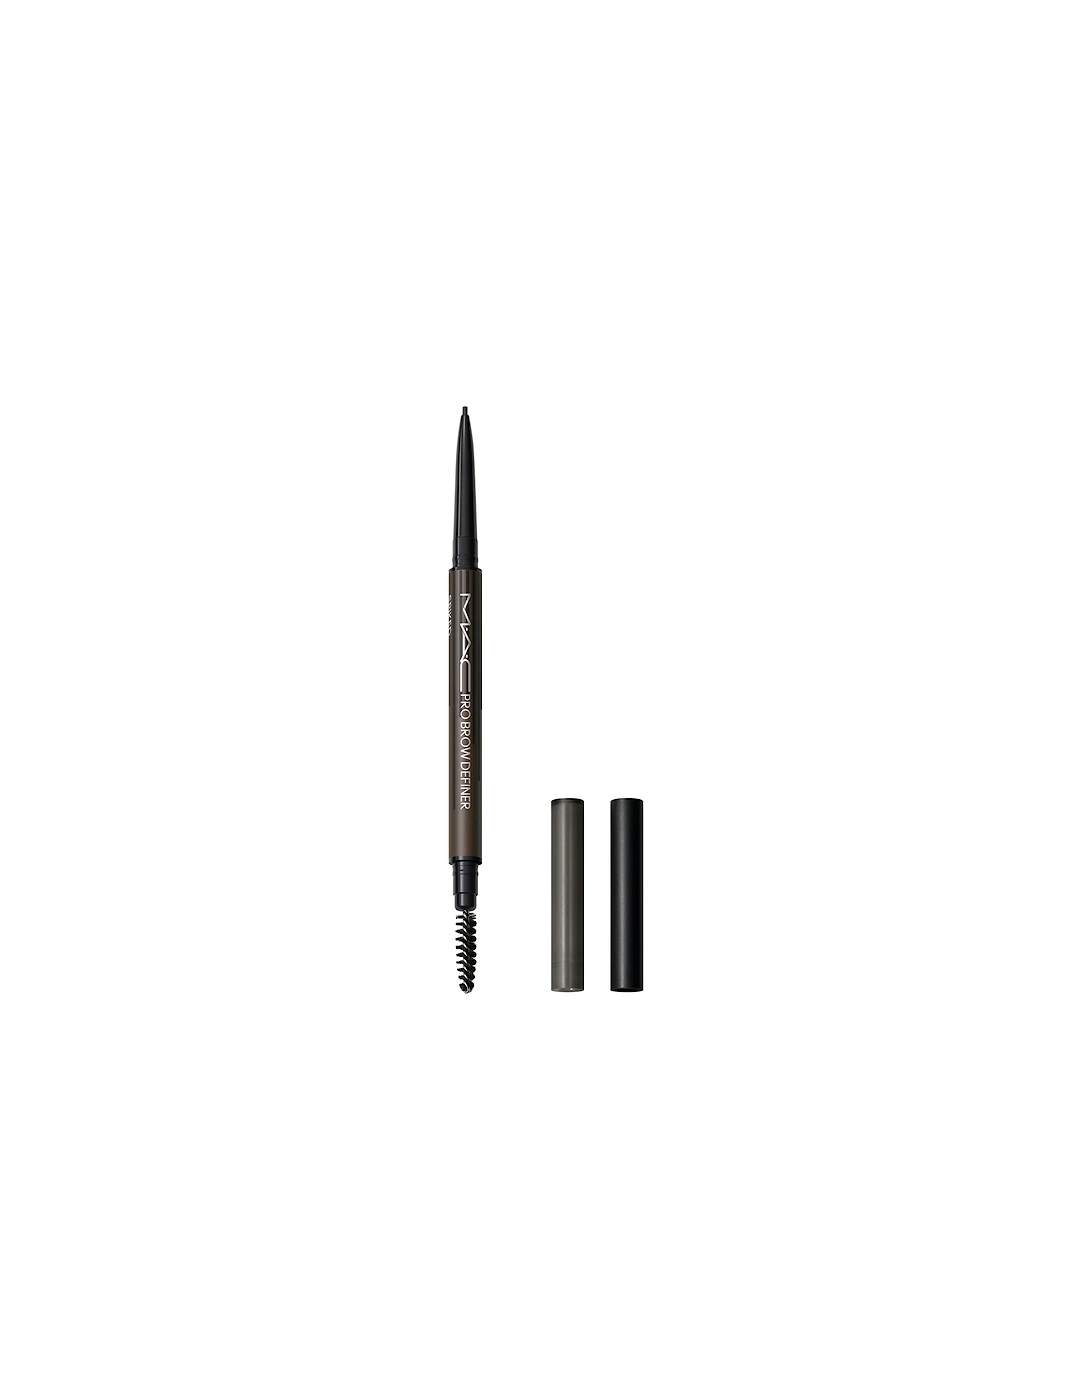 Pro Brow Definer 1mm-Tip Brow Pencil - Spiked, 2 of 1